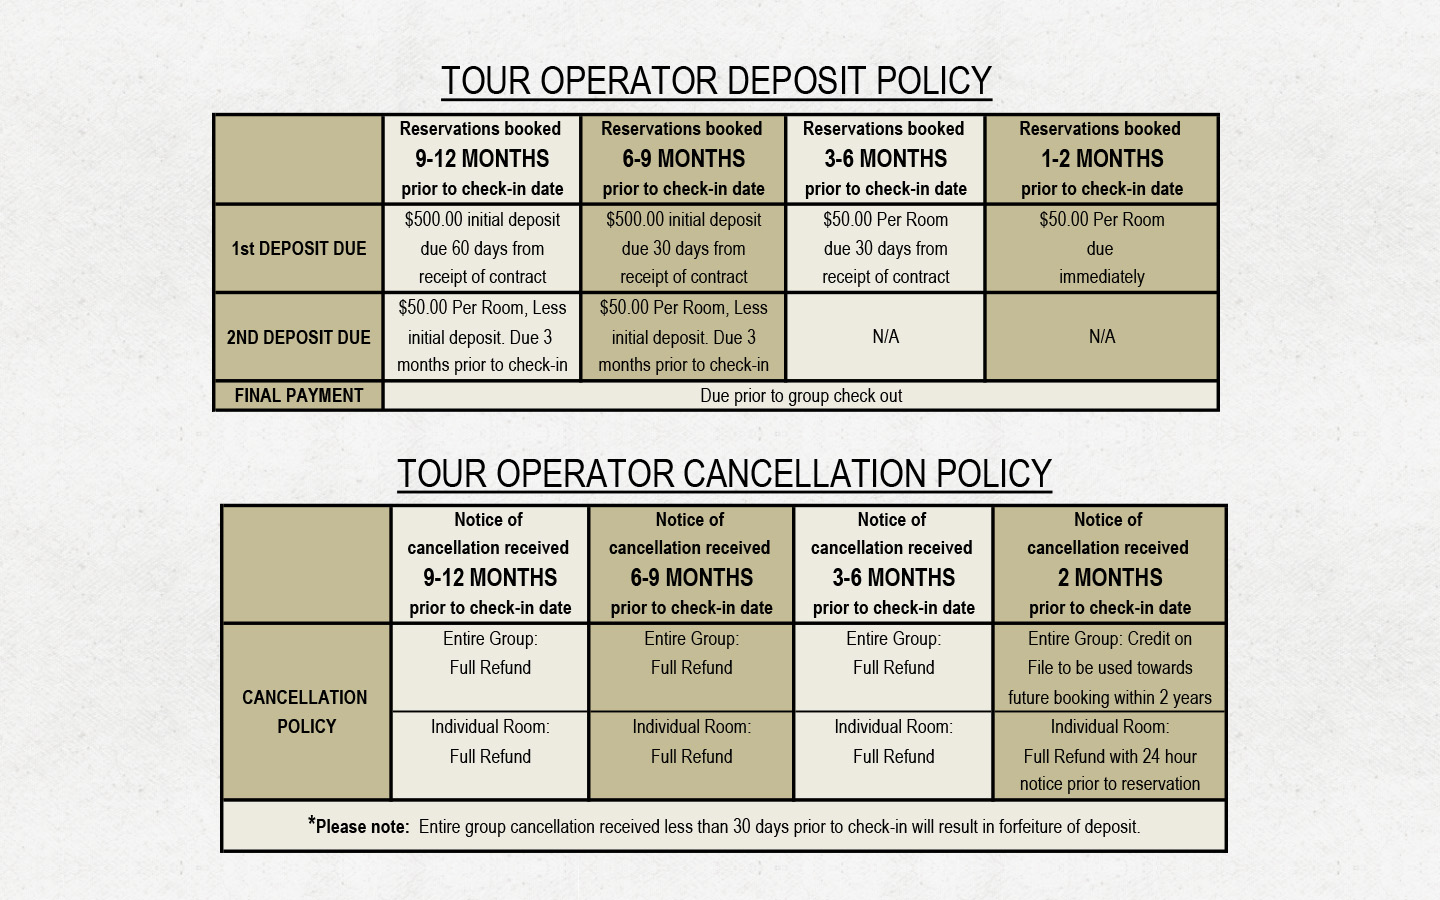 Tour Operator Deposit and Cancellation policy tables.